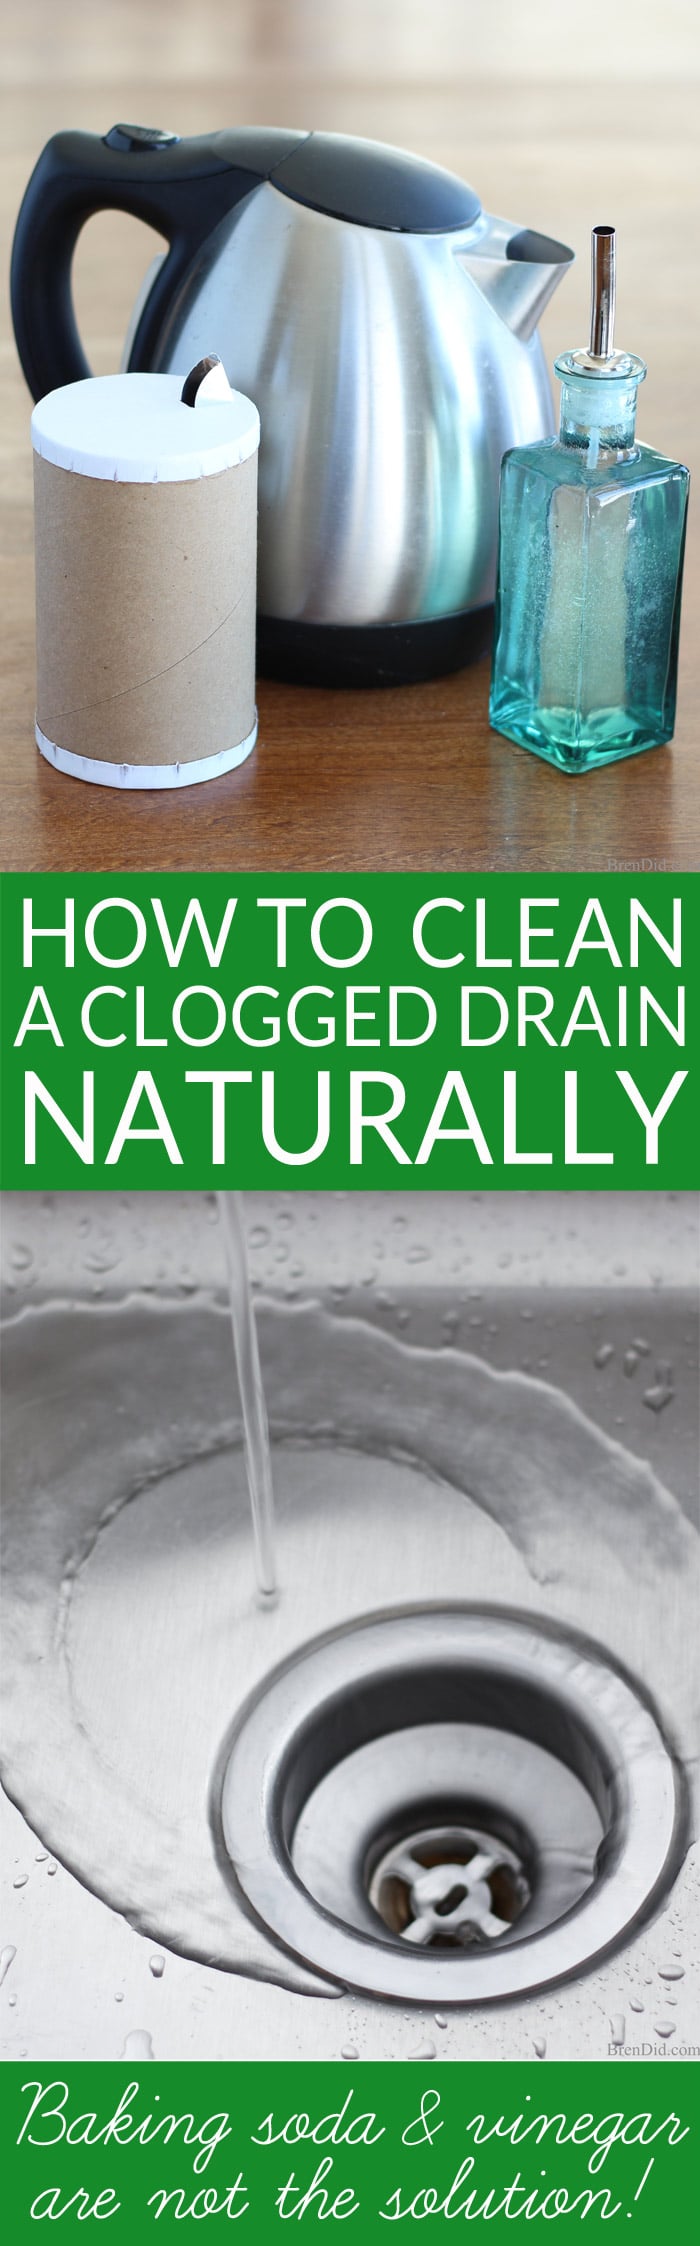 How to Clean Kitchen Sink Drain Naturally 